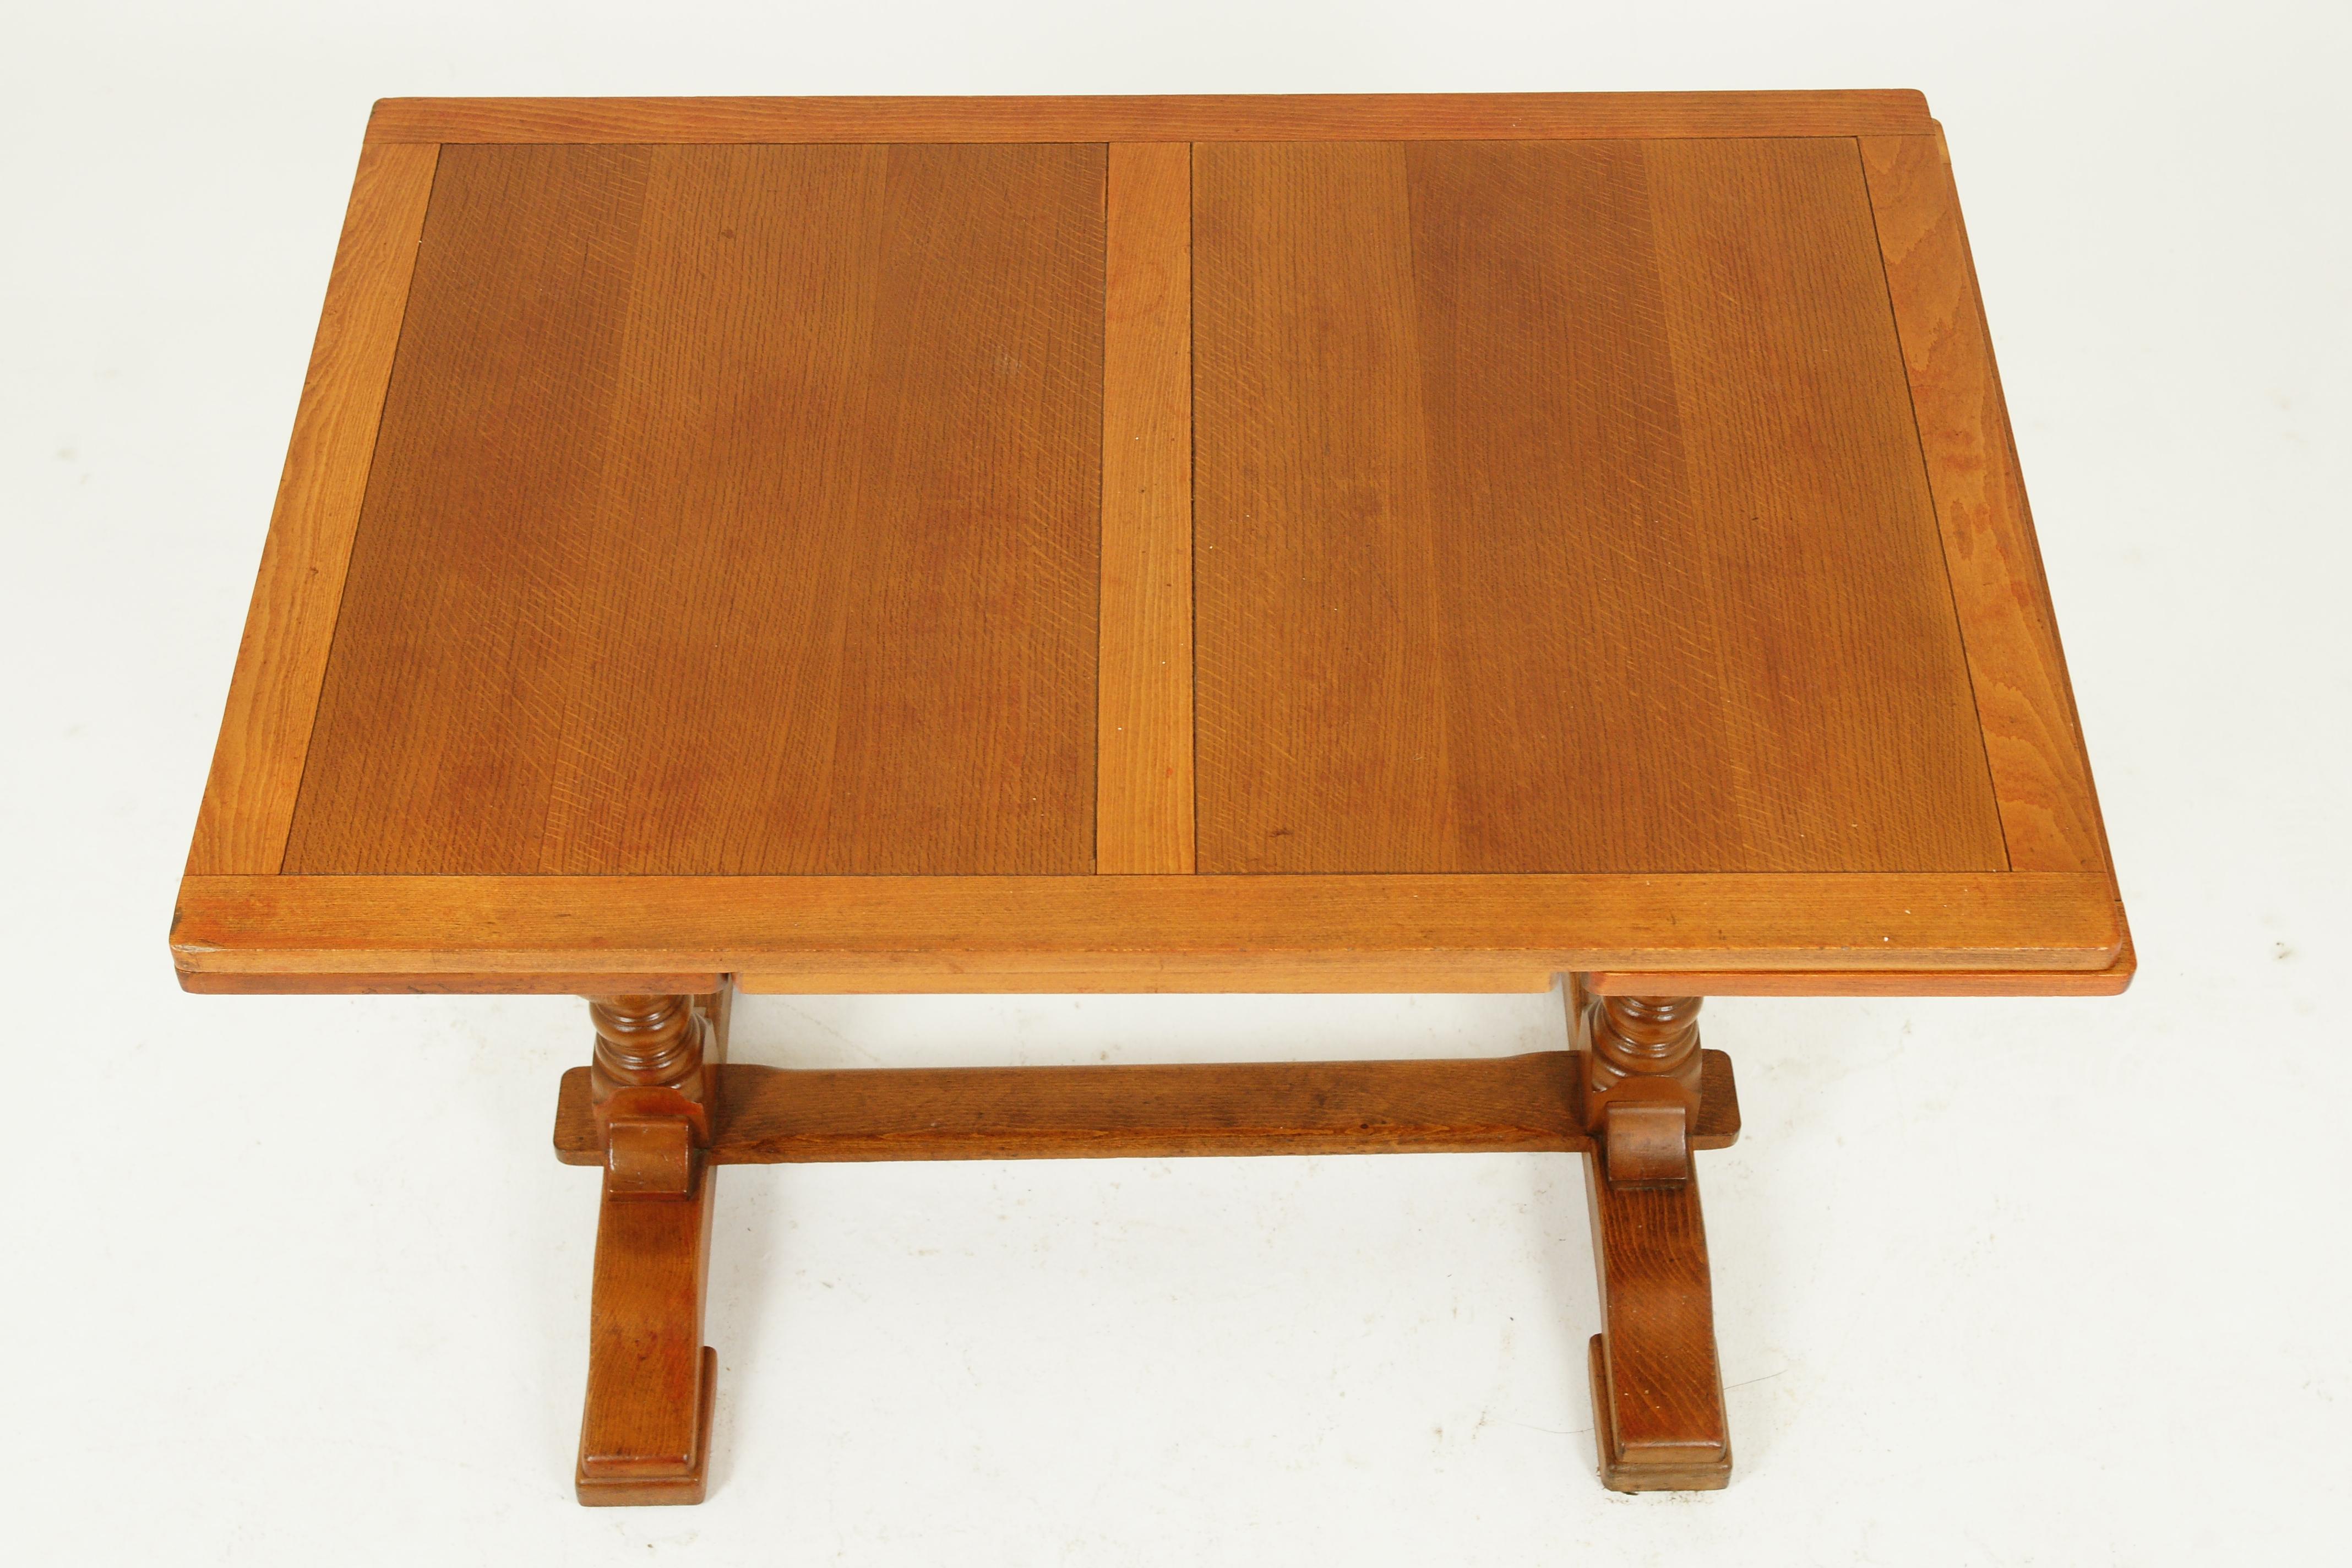 Vintage oak draw leaf, dining, refectory table, Scotland 1930

Scotland 1930
Solid oak and veneer
Table was refinished (not by us)
Rectangular top with 2 oak veneered panels
Solid oak frame
Pair of hidden leaves underneath
The leaves pull